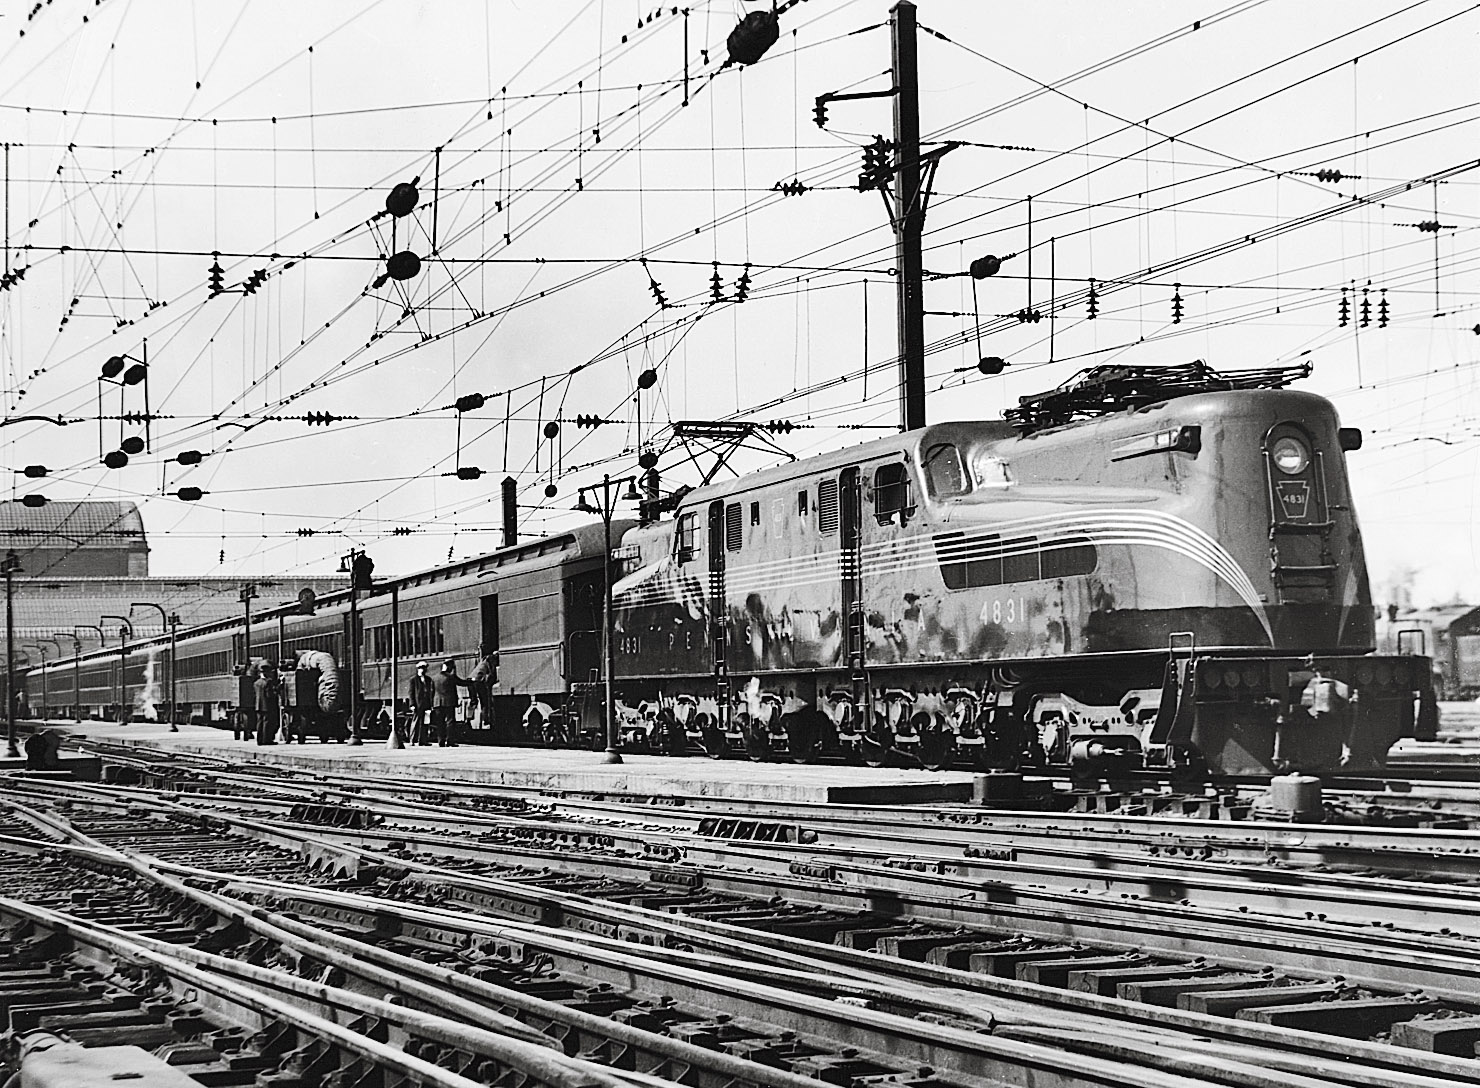 Locomotive 4831, one of the Pennsylvania Railroad’s fleet of 139 GG1 electrics introduced in 1934, stands at Washington Union Station, ready to depart with a passenger train for New York in about 1940. 